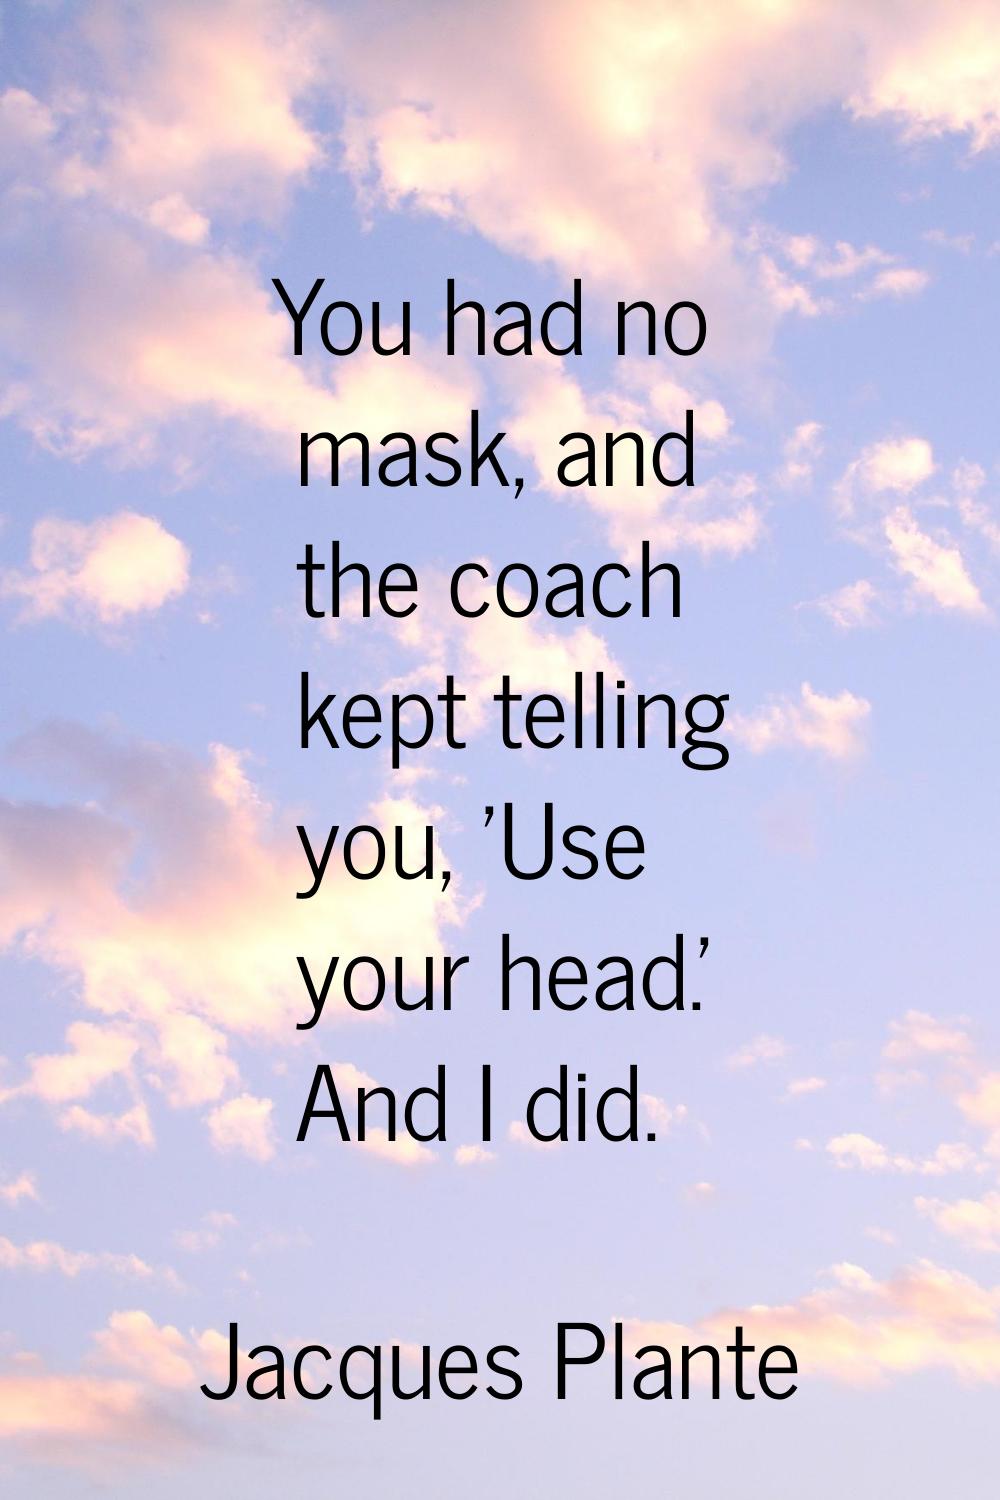 You had no mask, and the coach kept telling you, 'Use your head.' And I did.